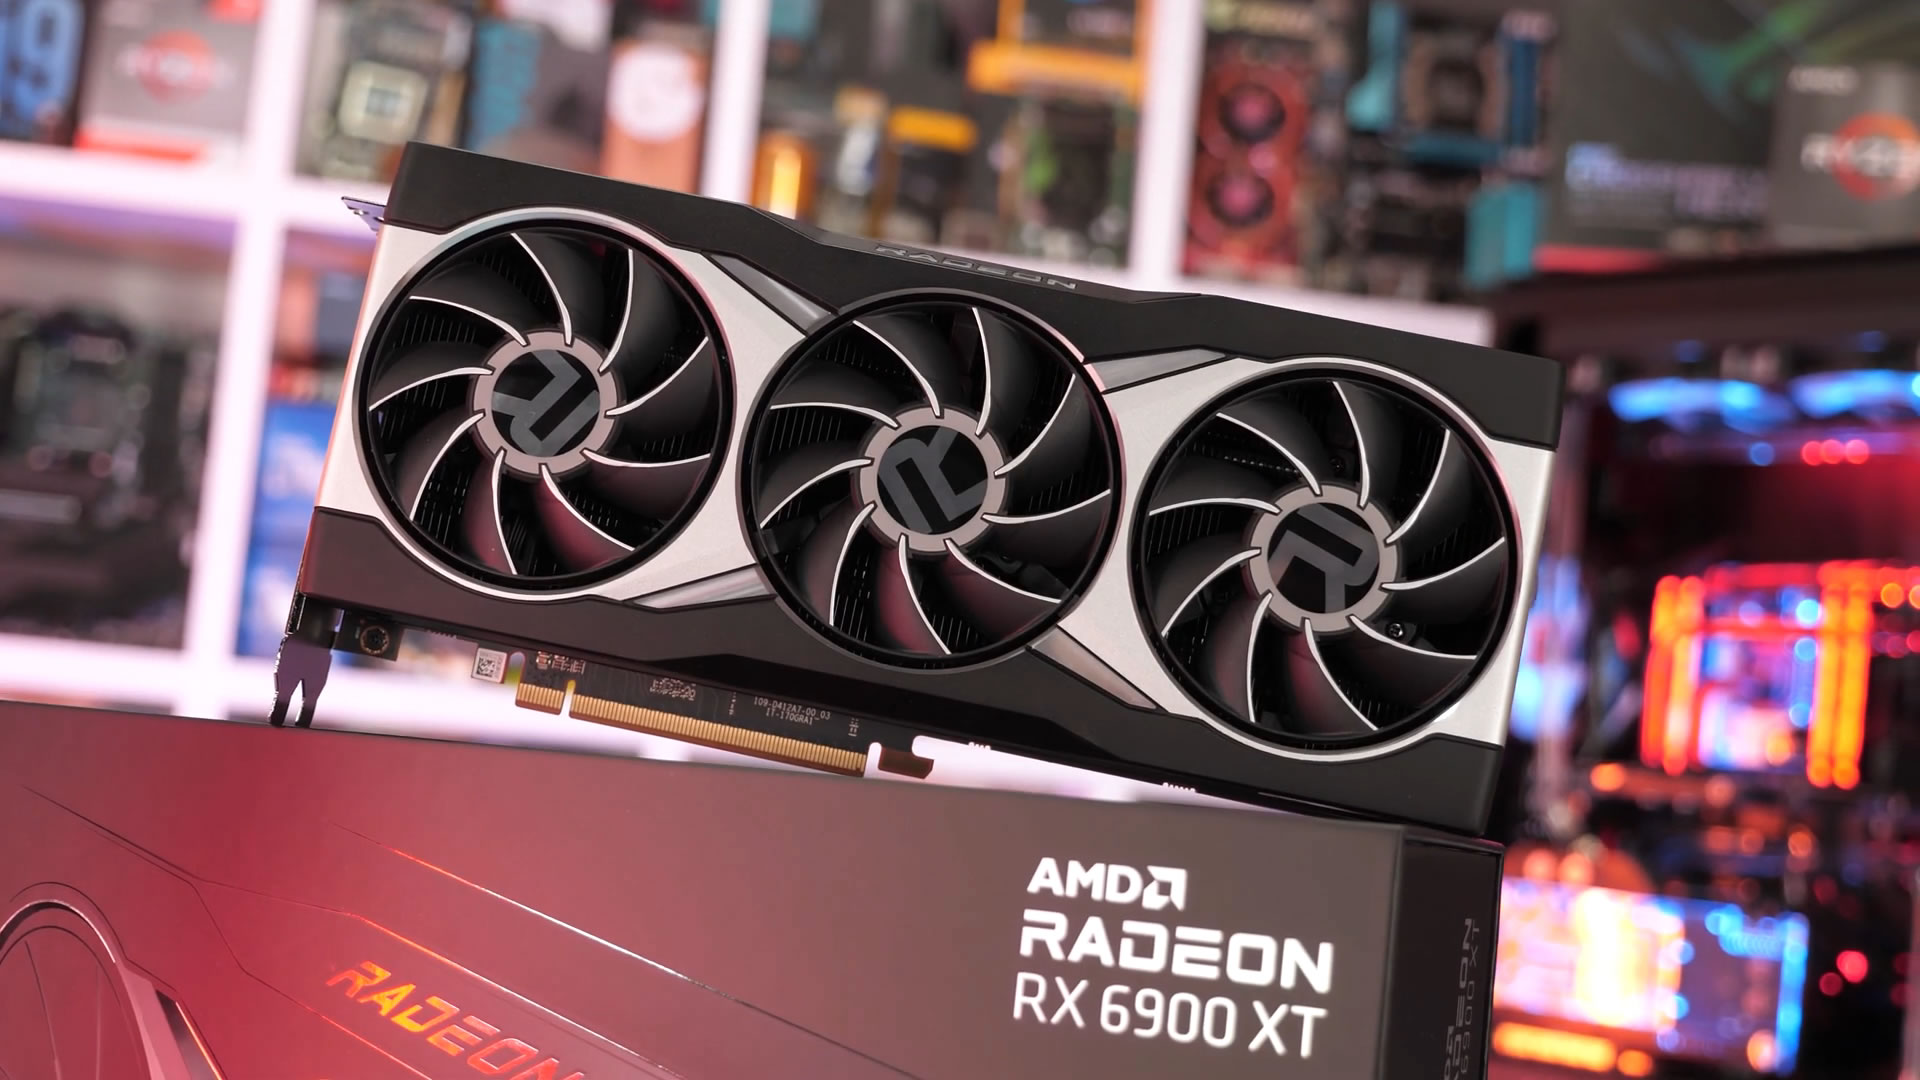 The AMD Radeon RX 6900 XT is now available for under $700